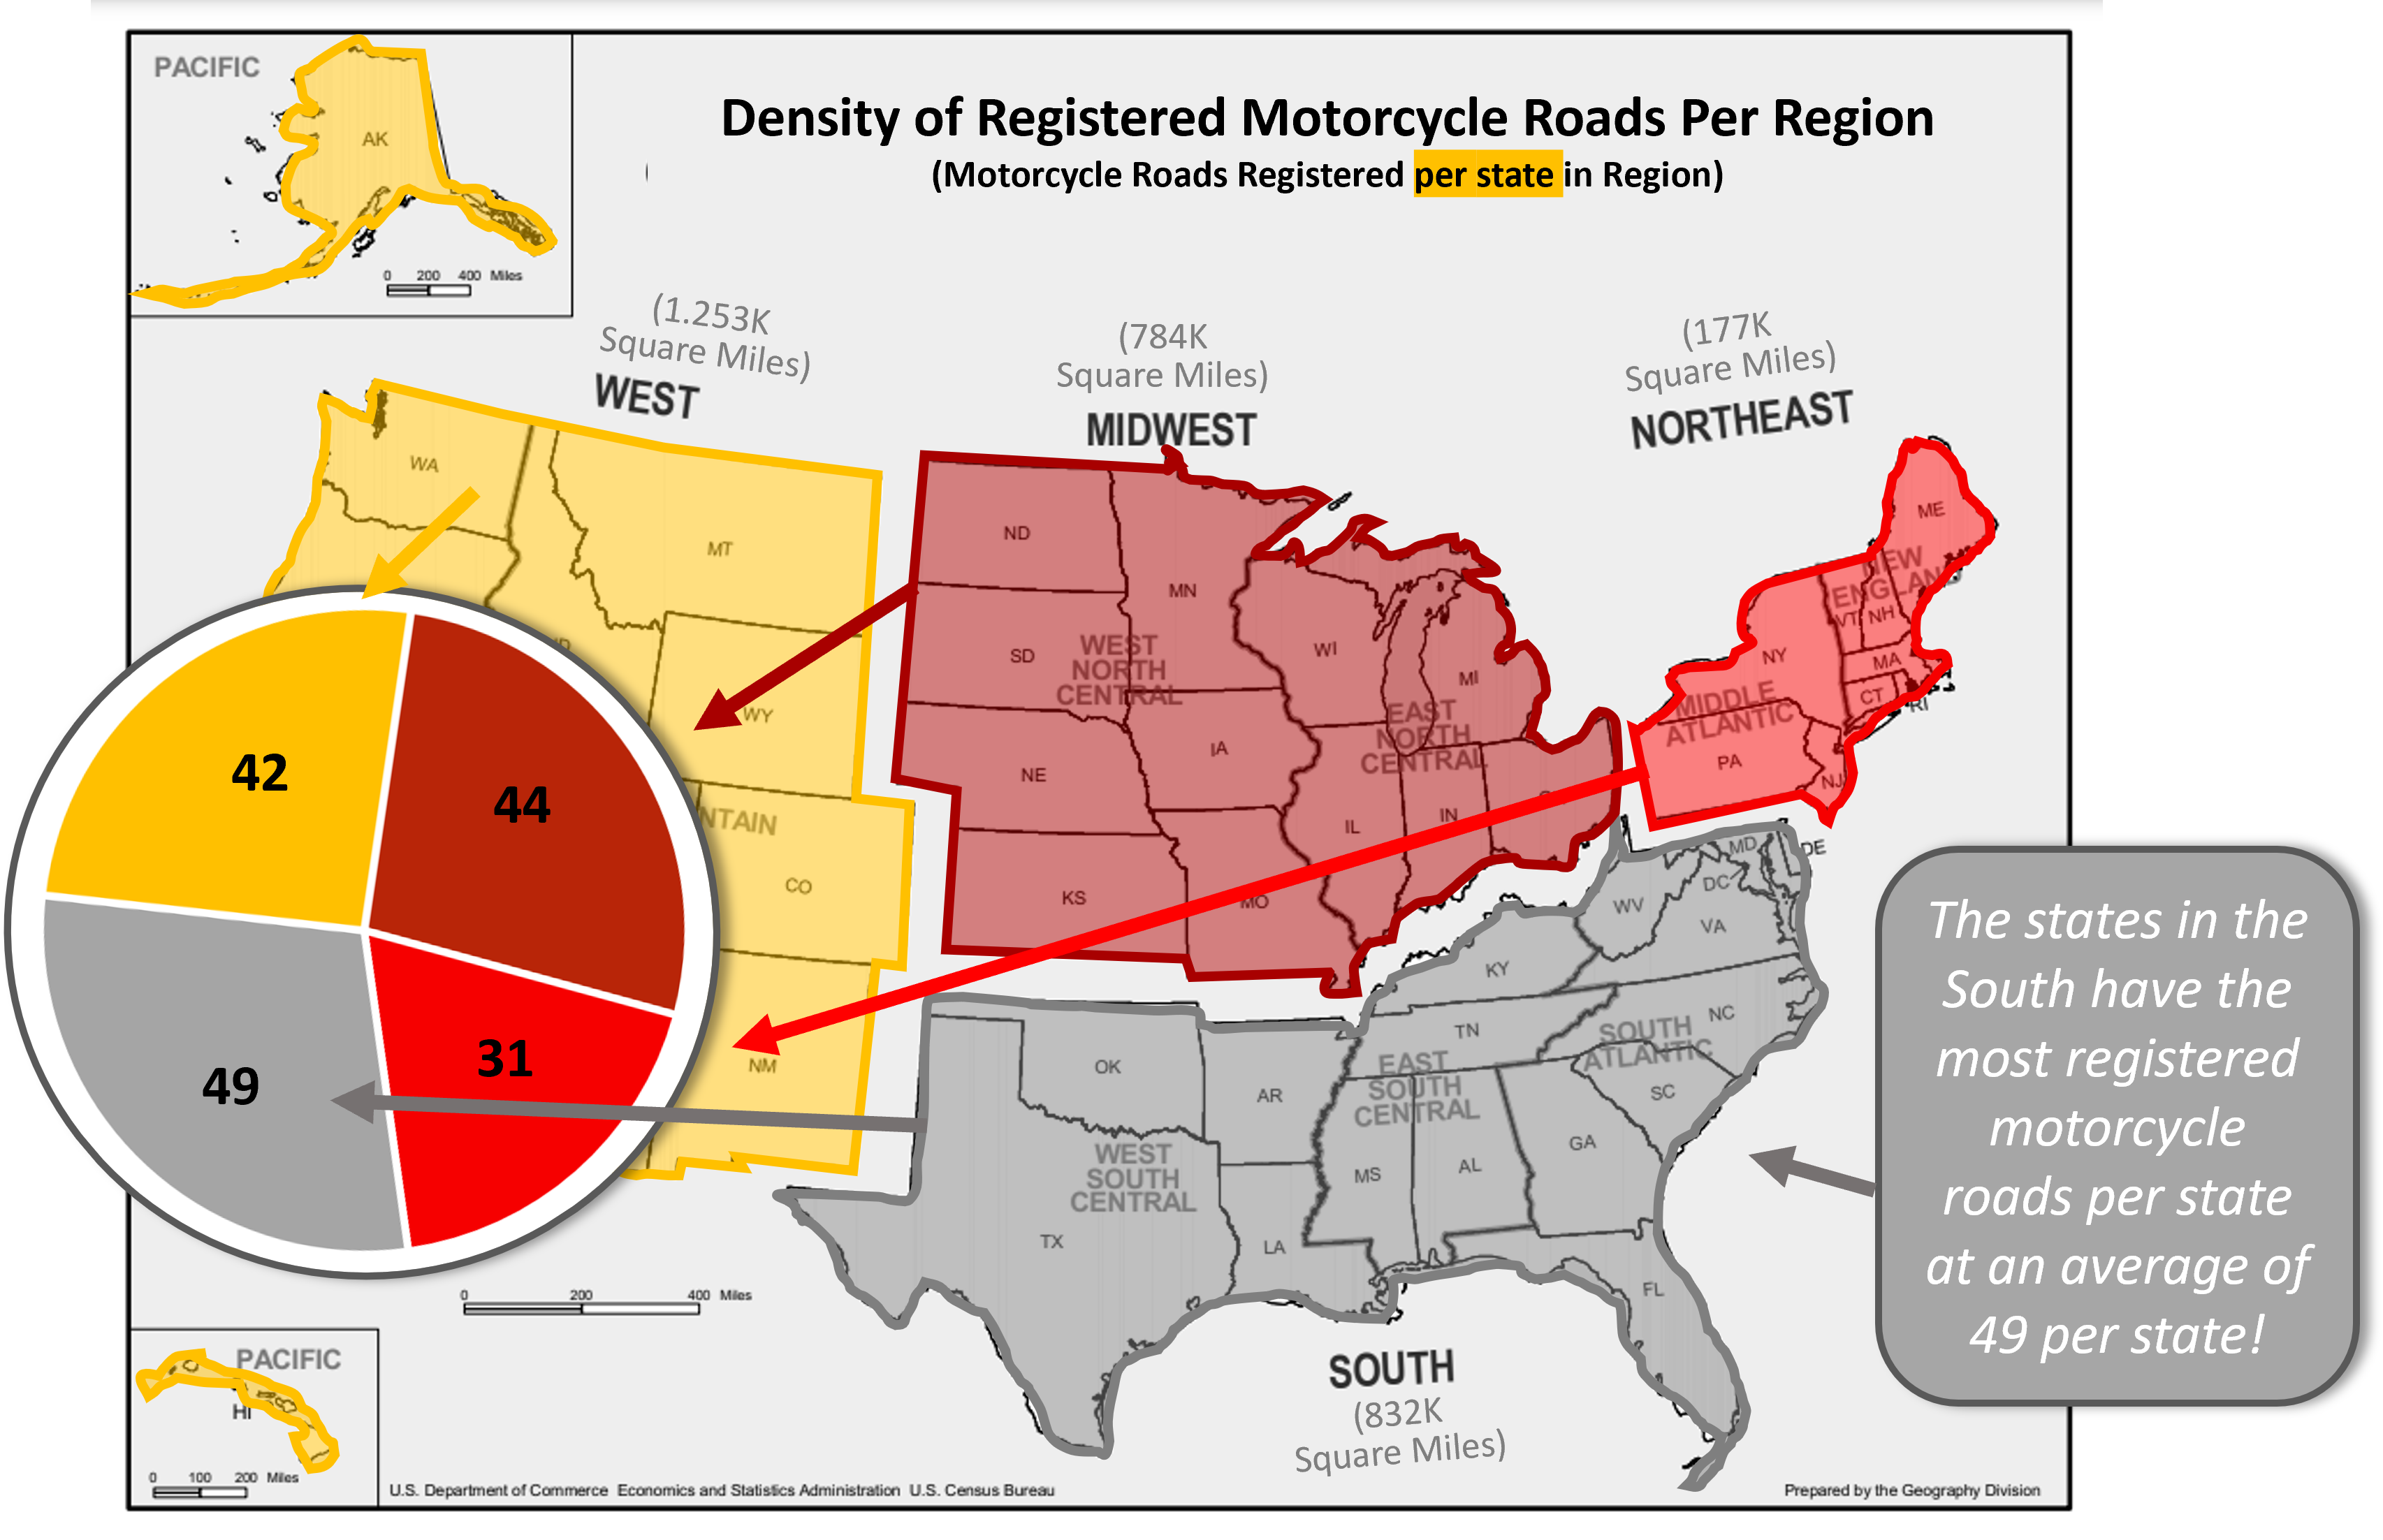 the South has the most registered motorcycle routes per state of all USA Census regions